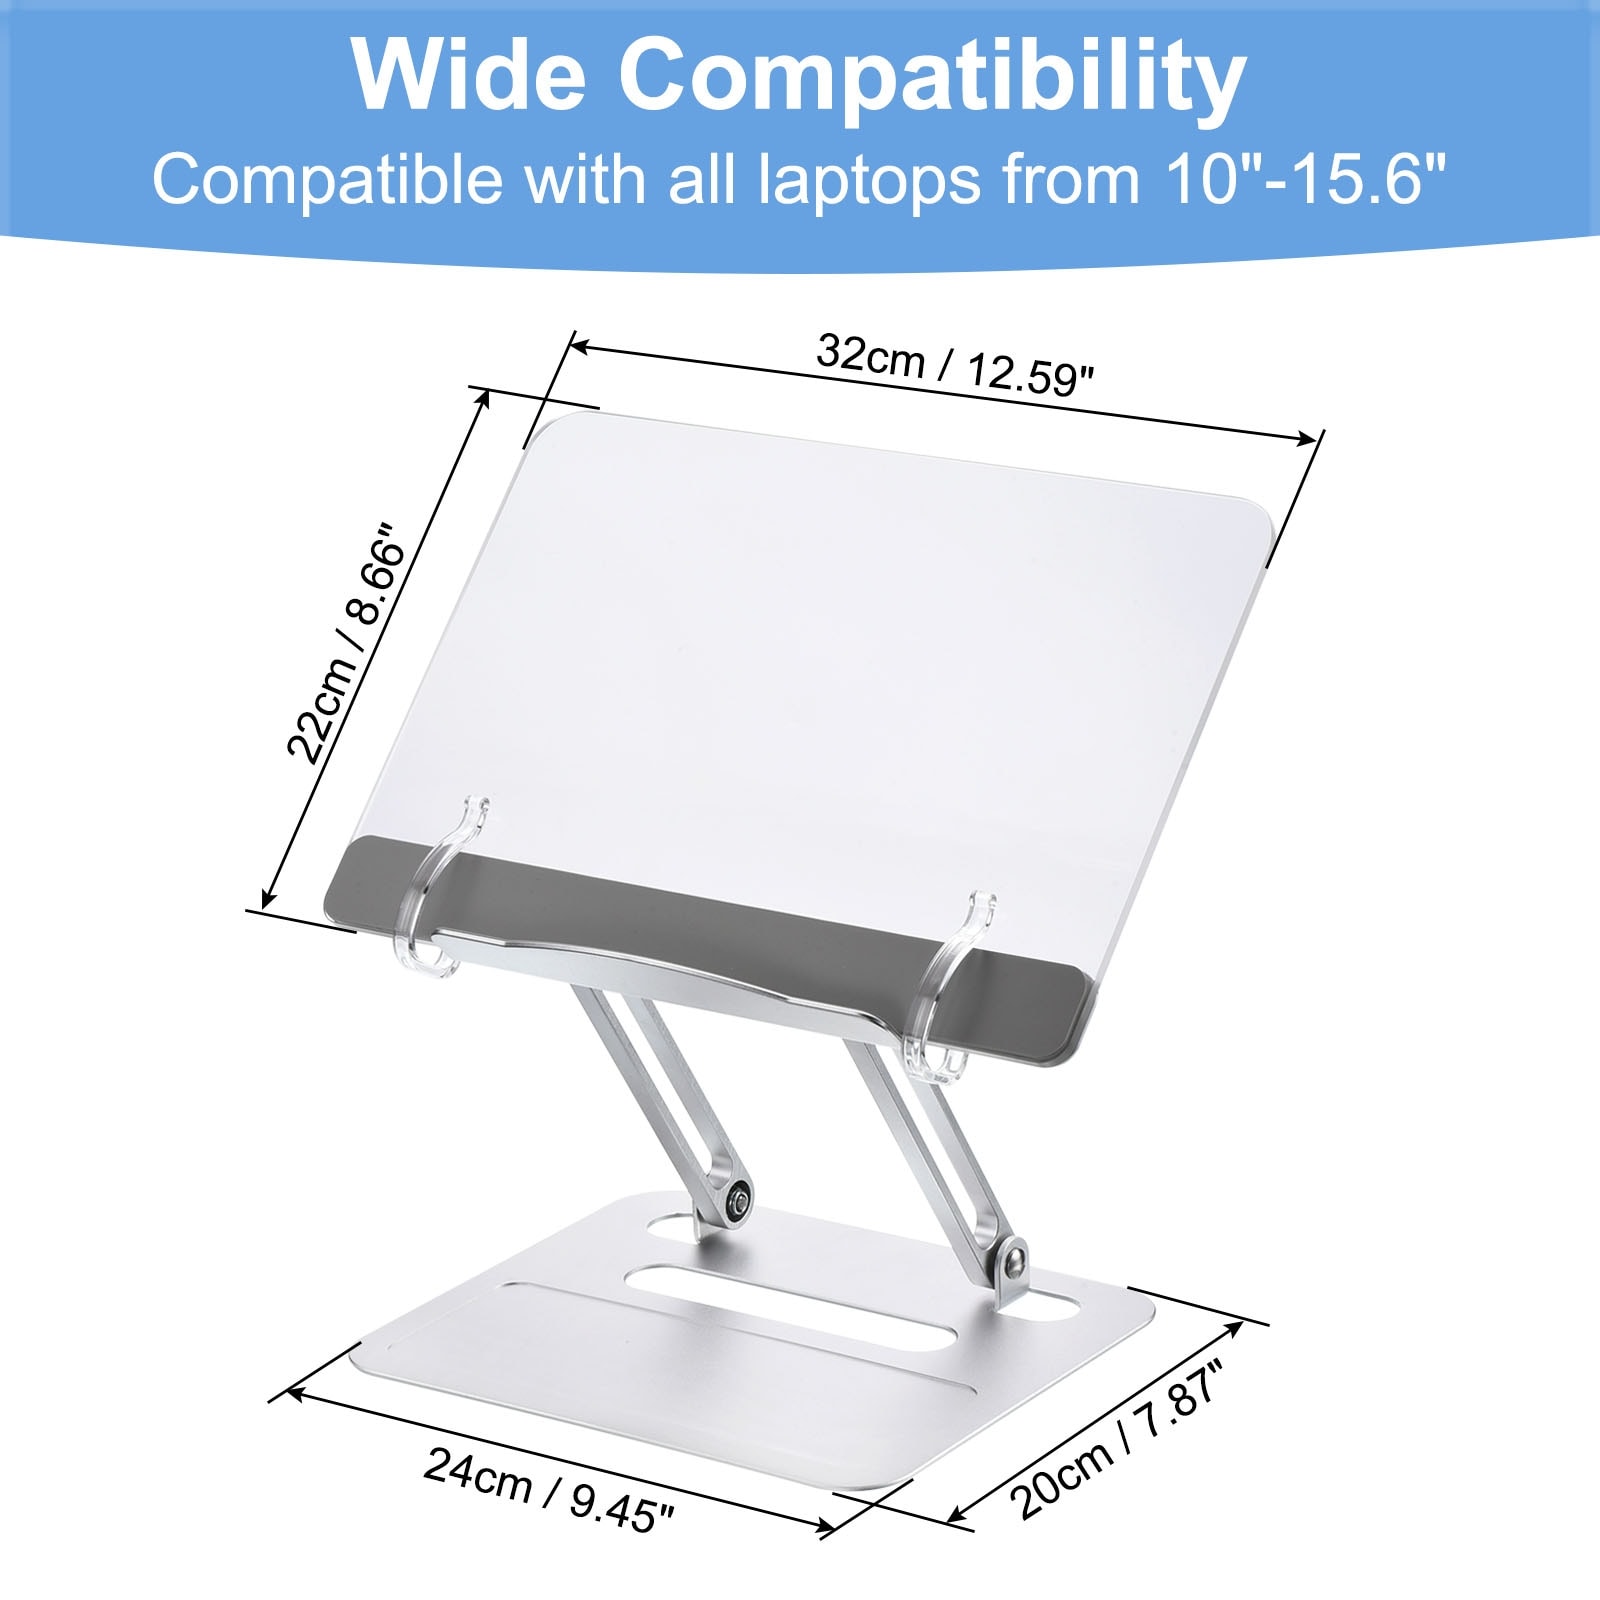 Unique Bargains Acrylic Book Stand Adjustable Height Book Holder for Textbook Magazine, Silver